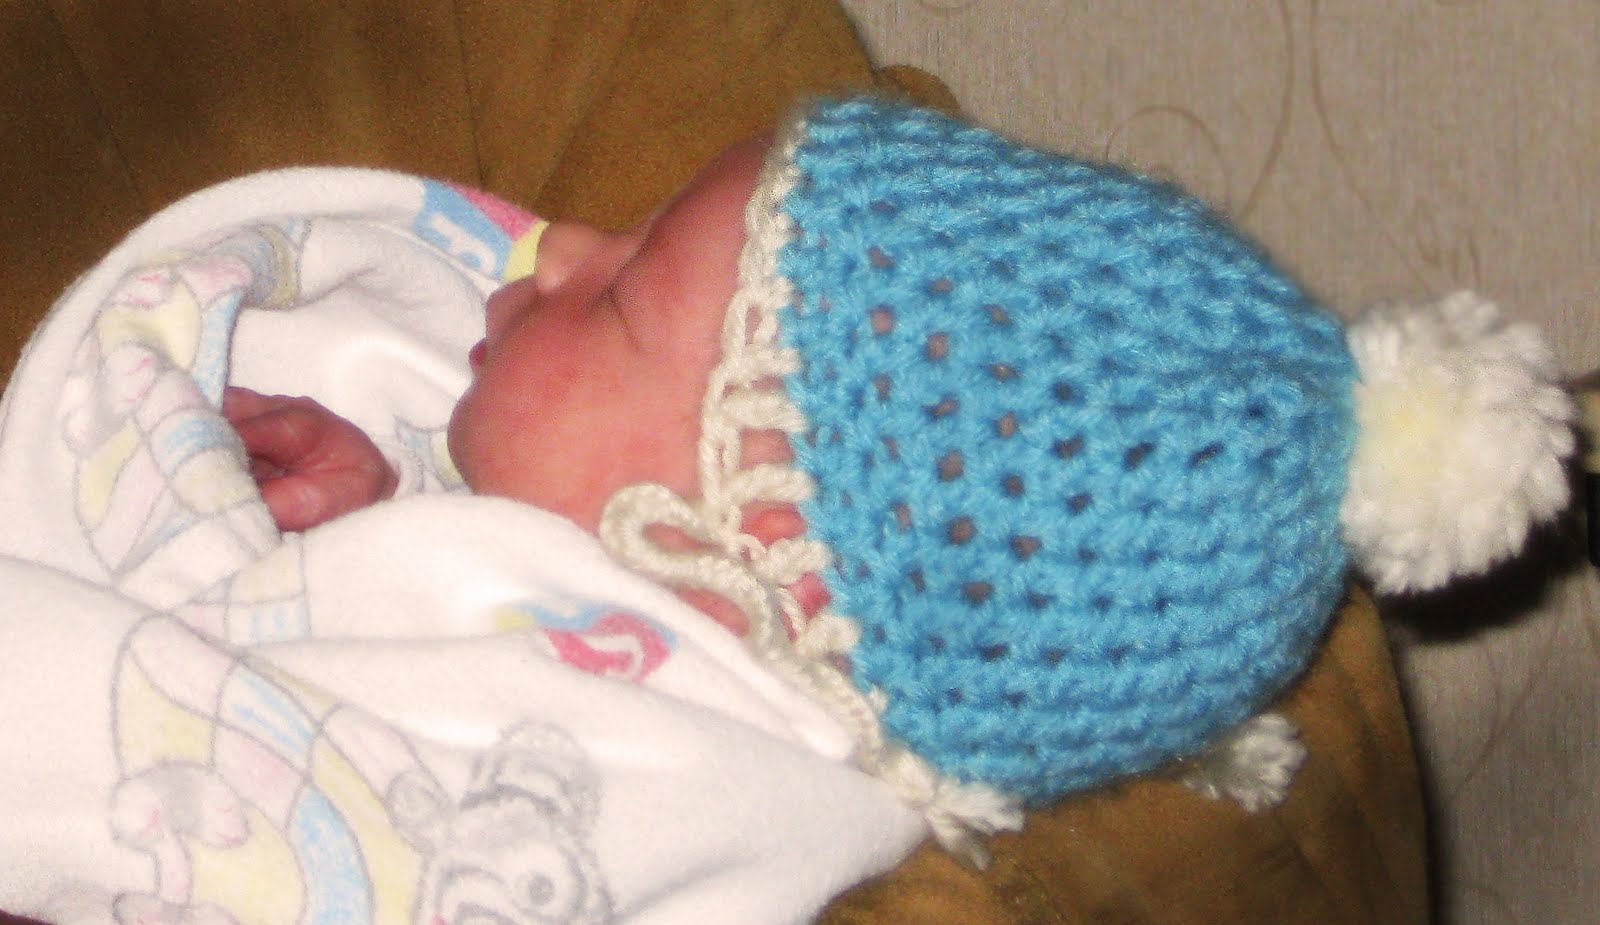 Crocheted Hats on Etsy - Crocheted beanies, caps, baby hats